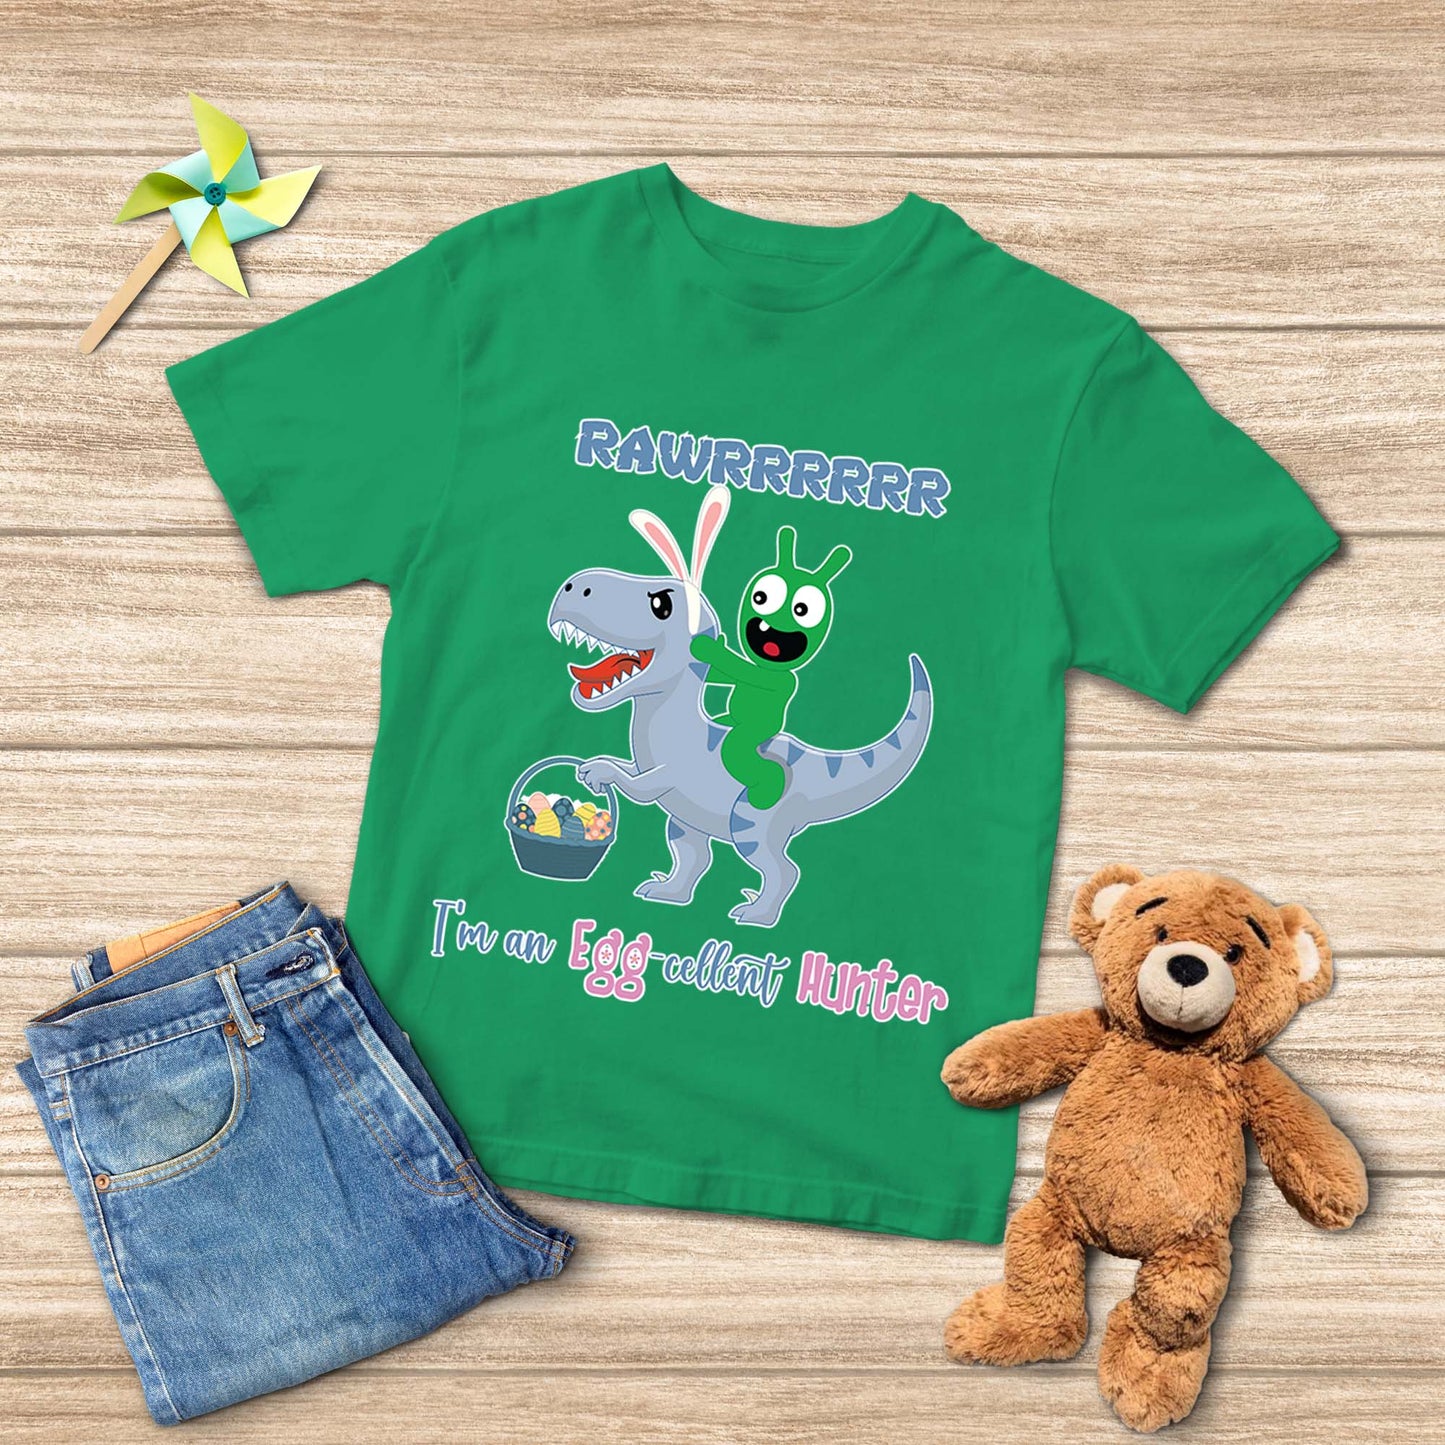 I'm An Egg-Cellent Hunter Pea Pea Youth T-shirt